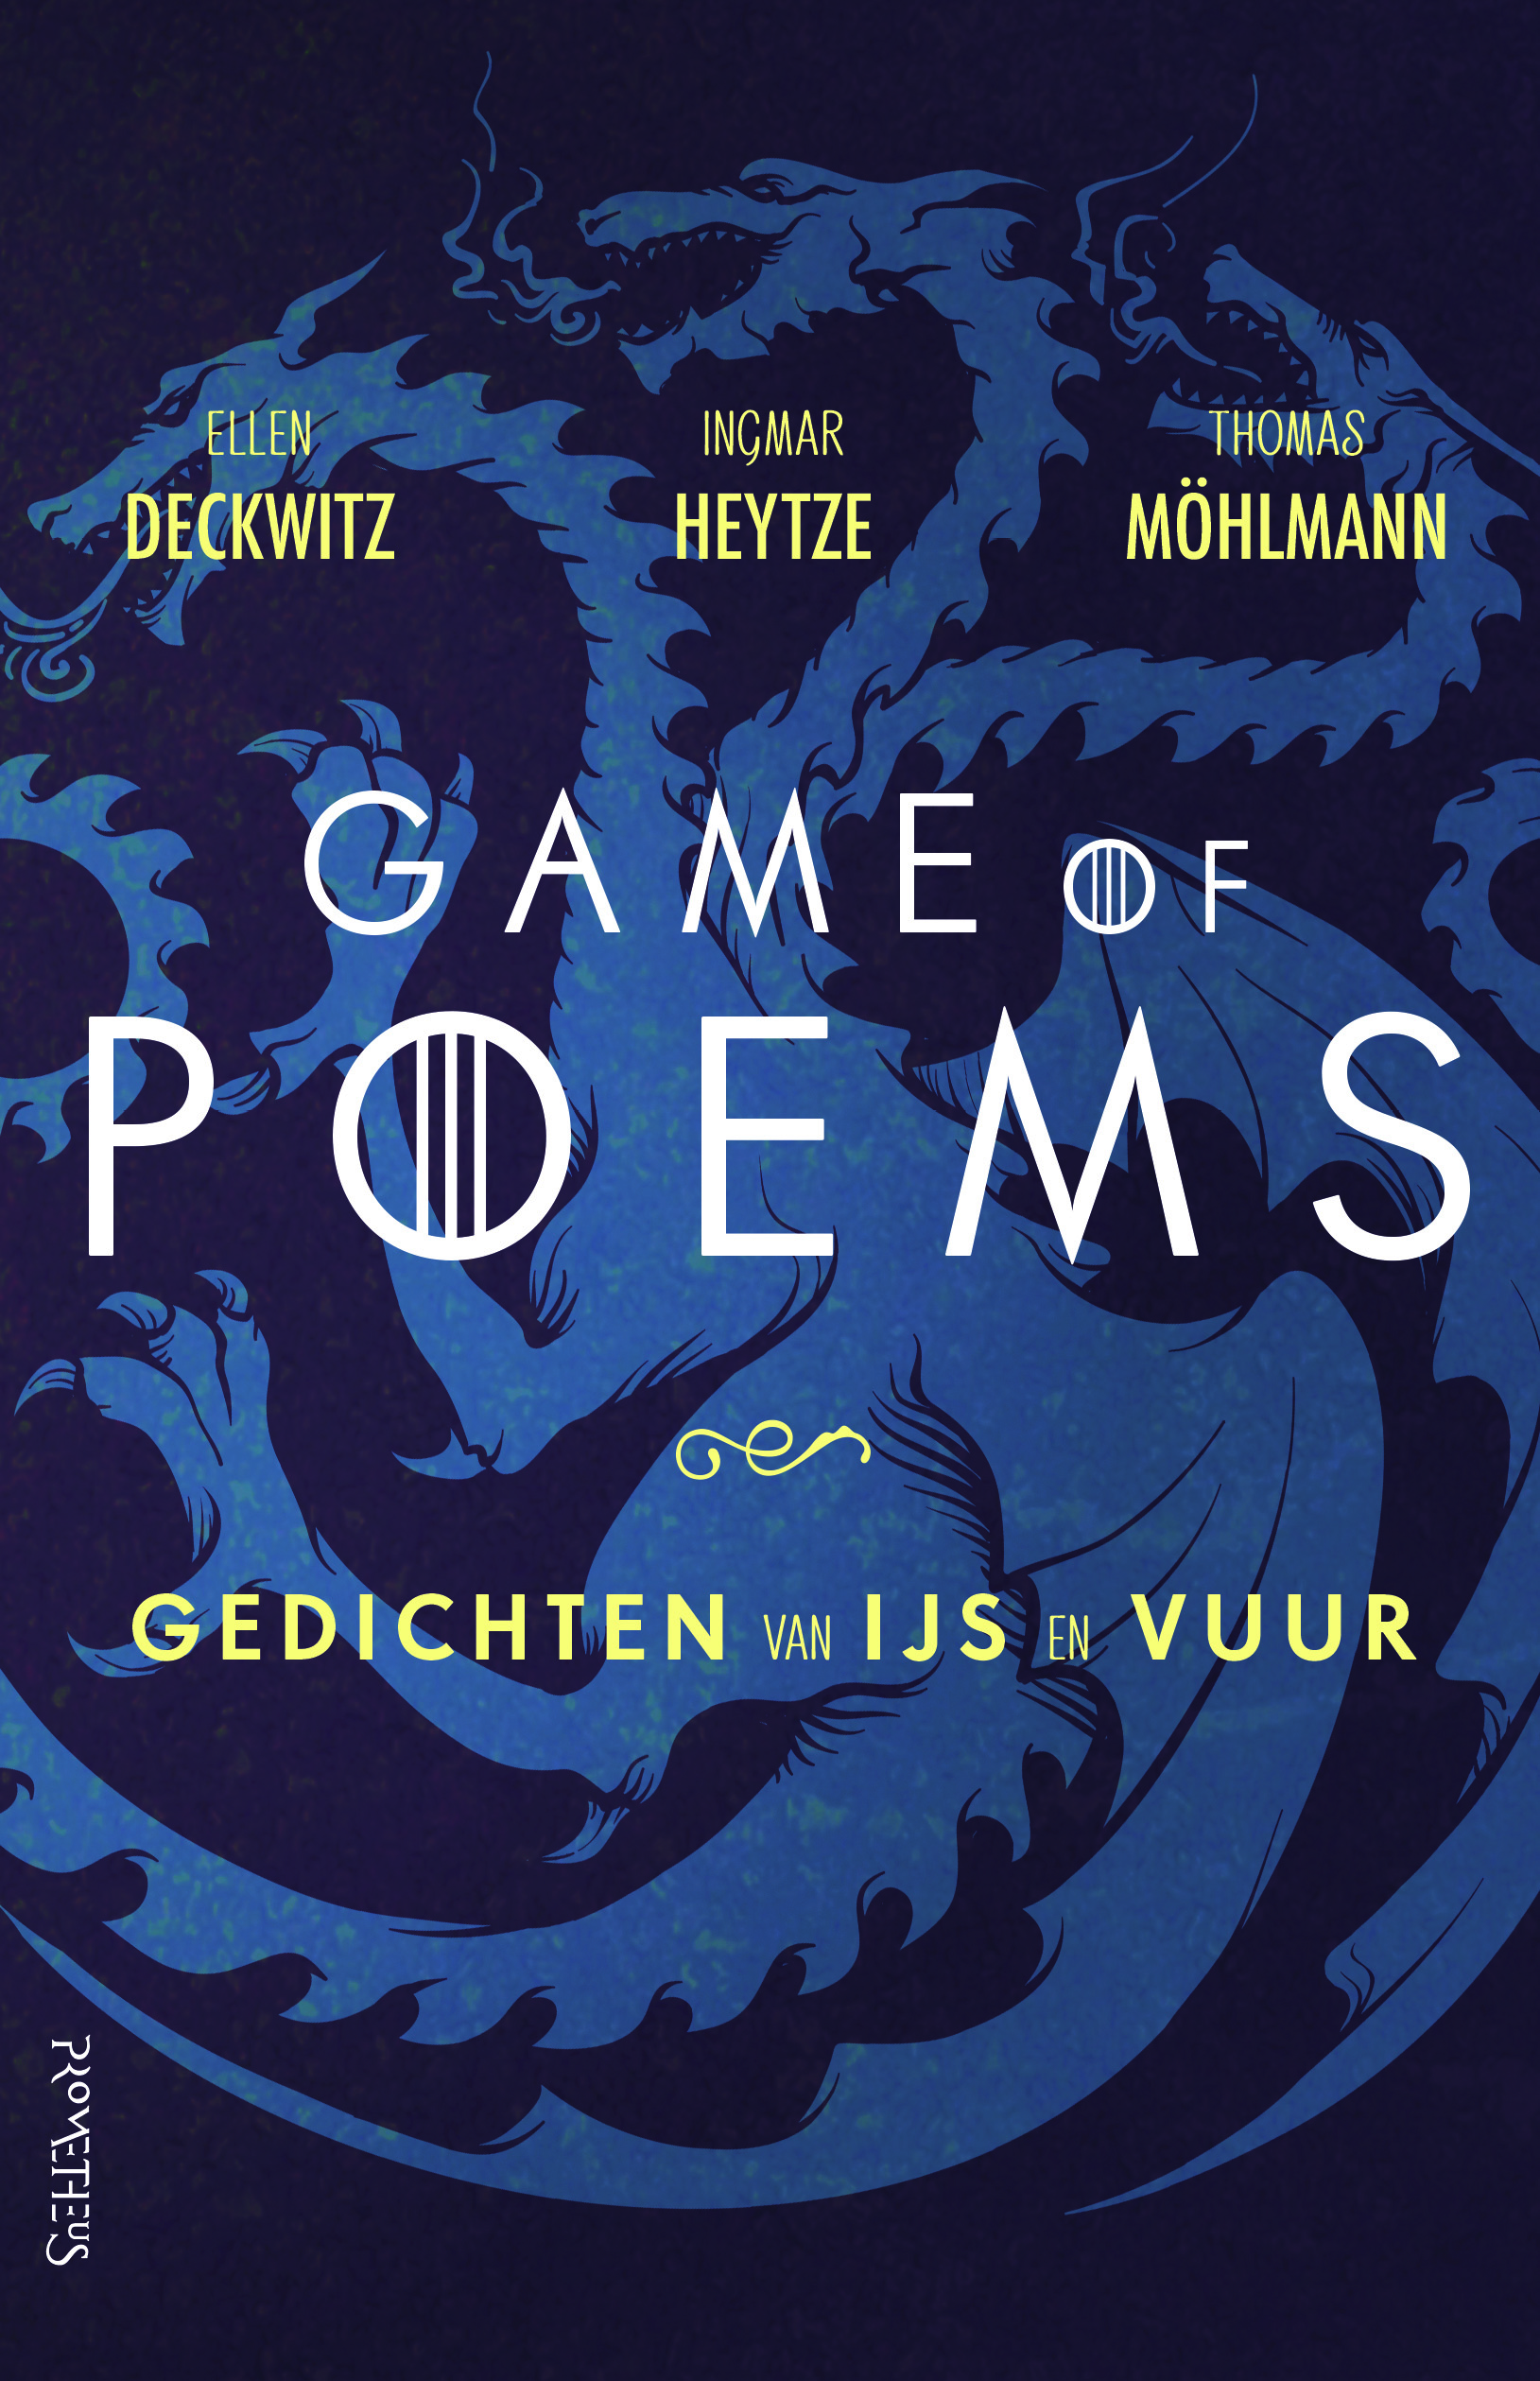 Game of Poems@1.indd